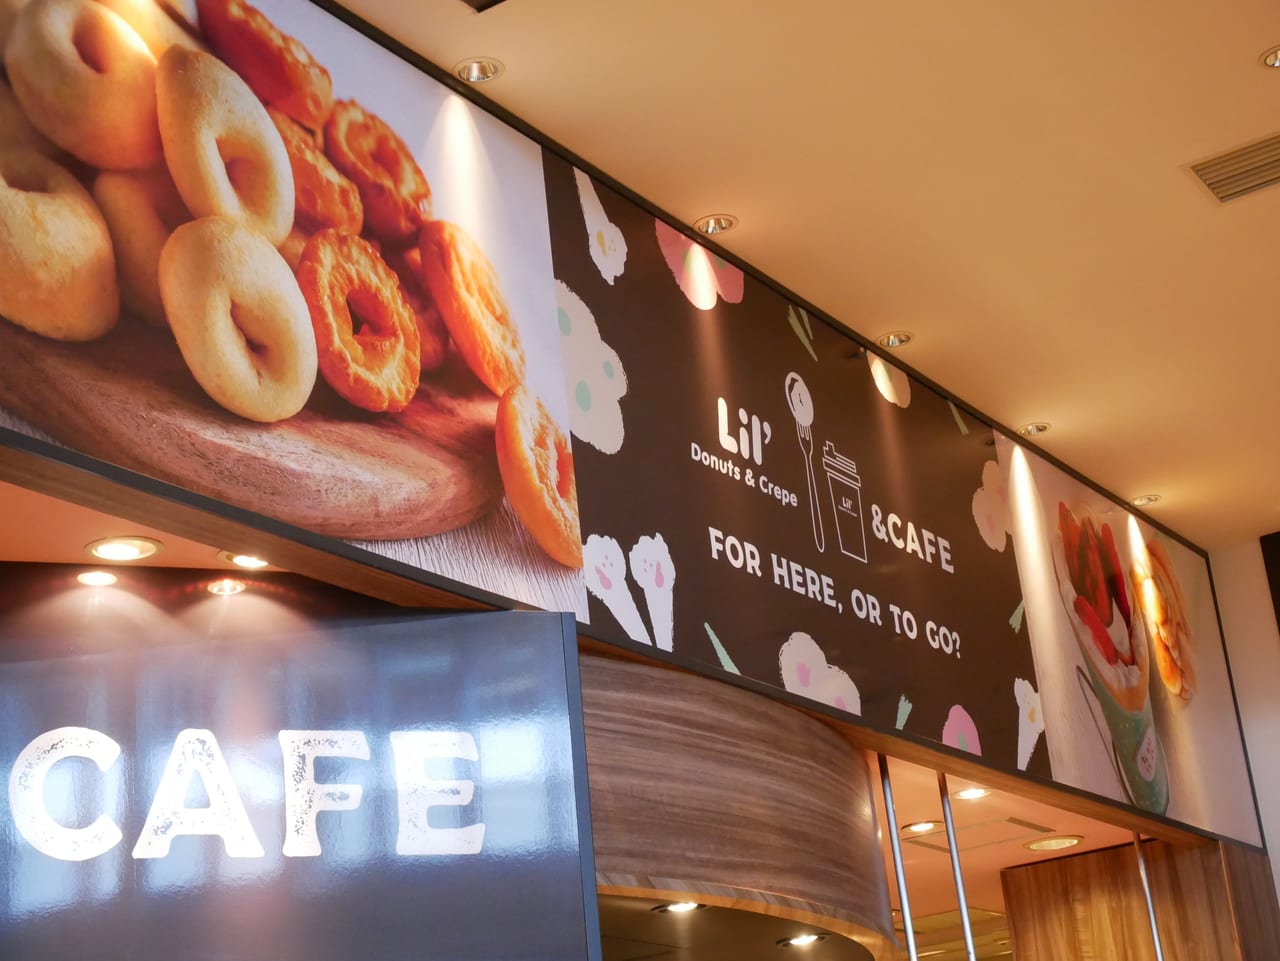 Lil'Donuts & Crepe 三井アウトレットパーク入間店の看板